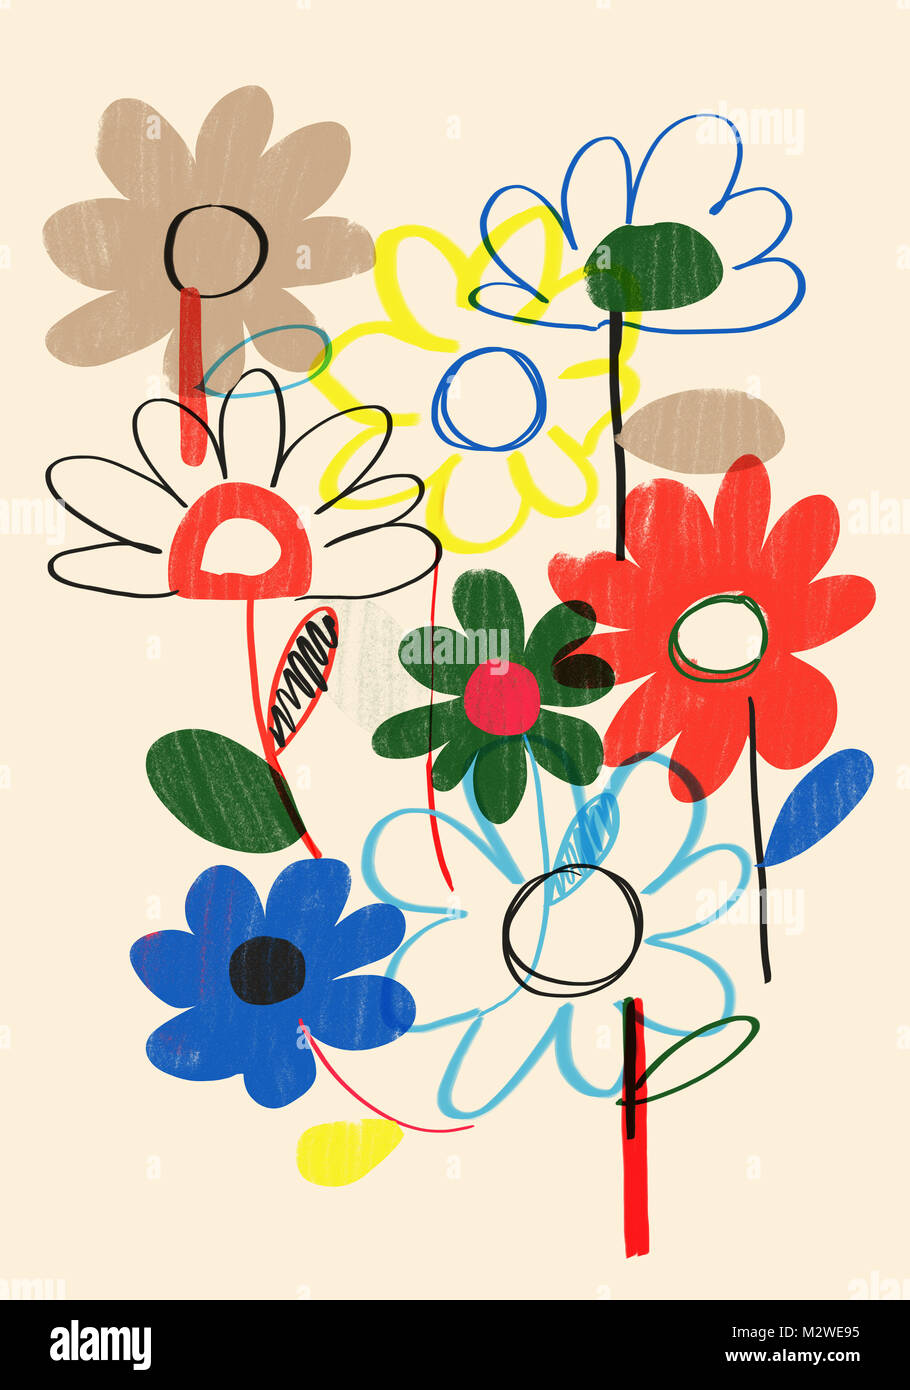 Conceptual and abstract illustration, poster or background with colorful, vivid and cheerful style that symbolizes spring Stock Photo